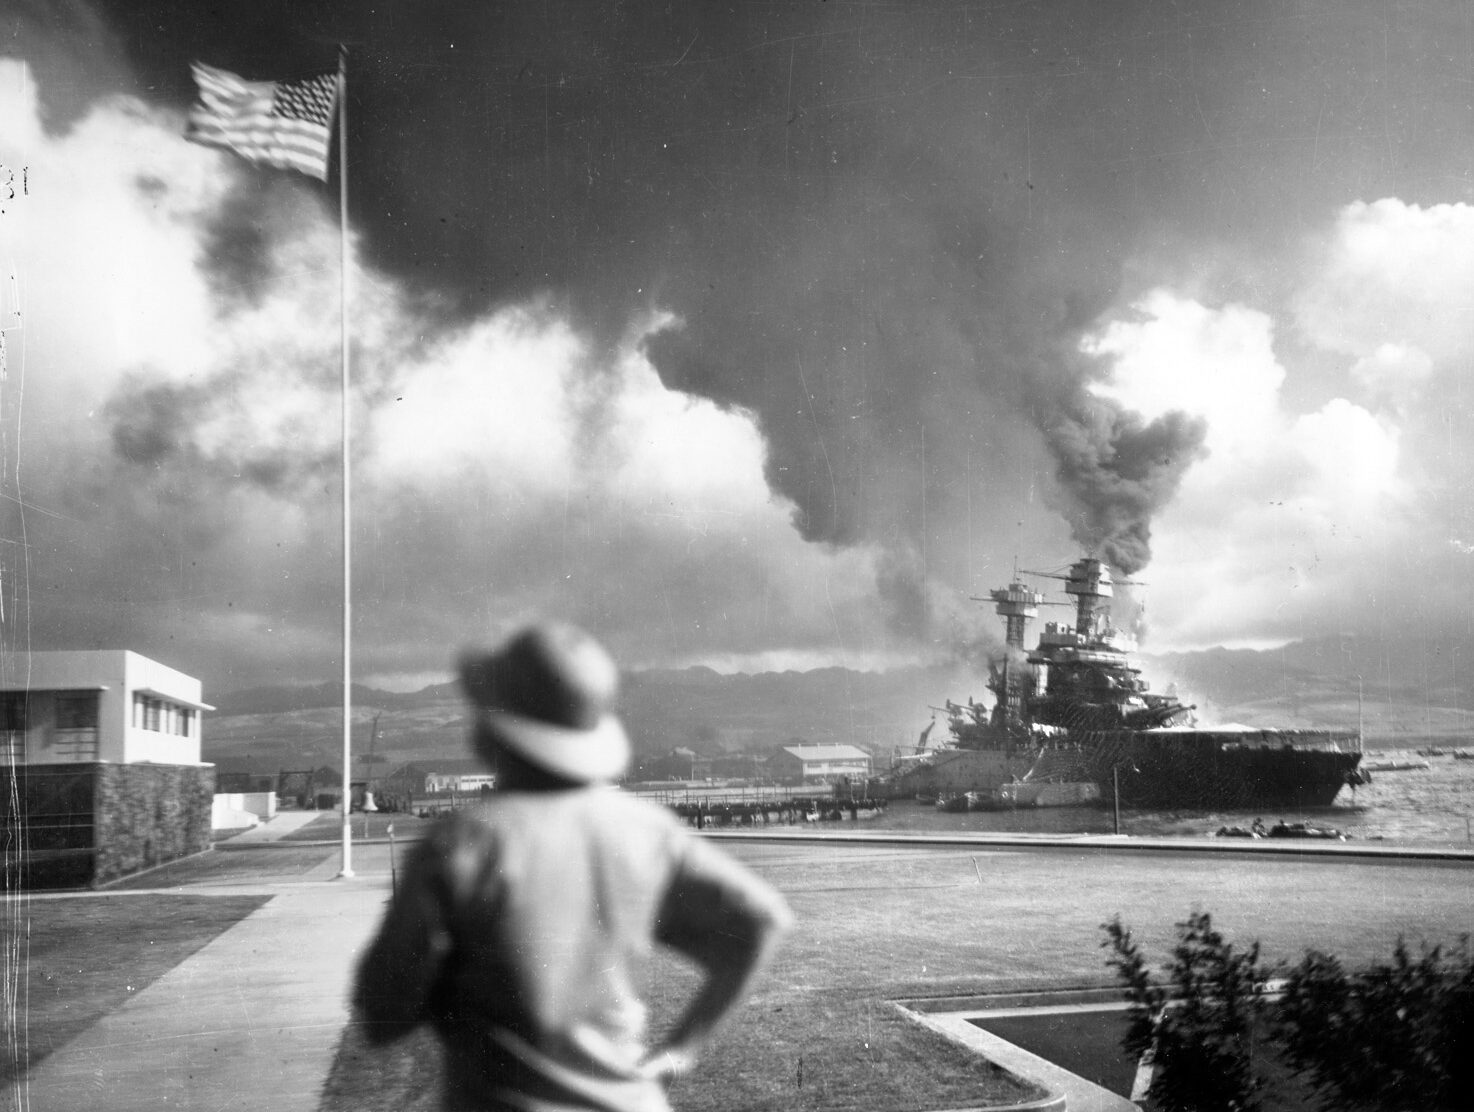  A survivor appears to look for Japanese aircraft beyond the defiant American flag on Ford Island as California lists to port after taking bomb and torpedo hits from marauding Japanese aircraft. 